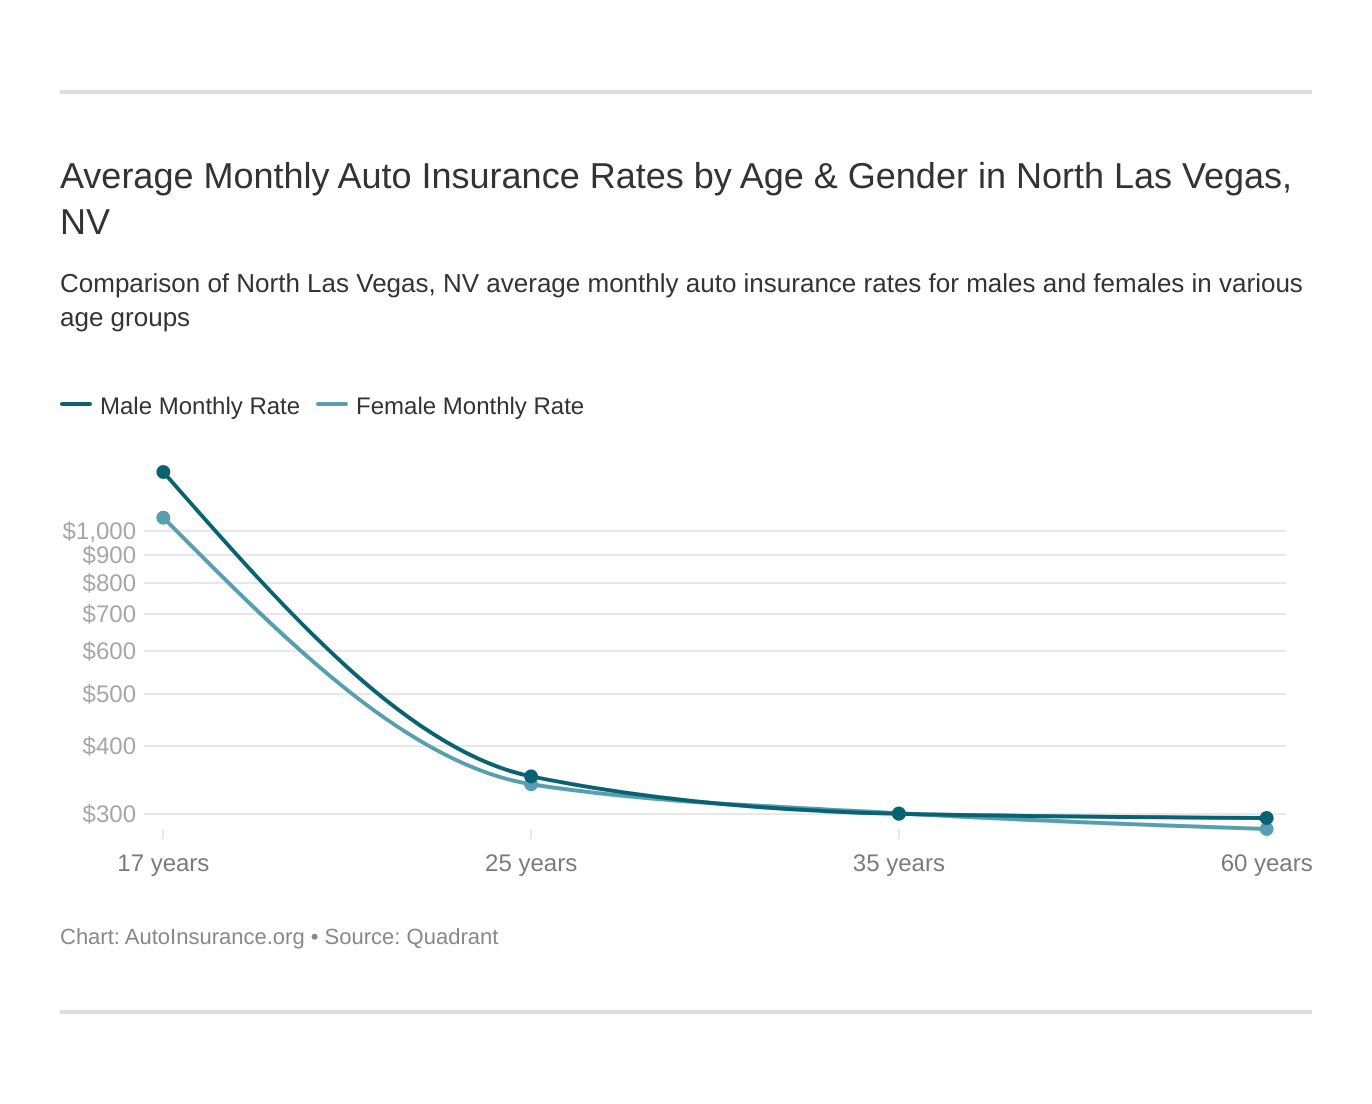 Average Monthly Auto Insurance Rates by Age & Gender in North Las Vegas, NV